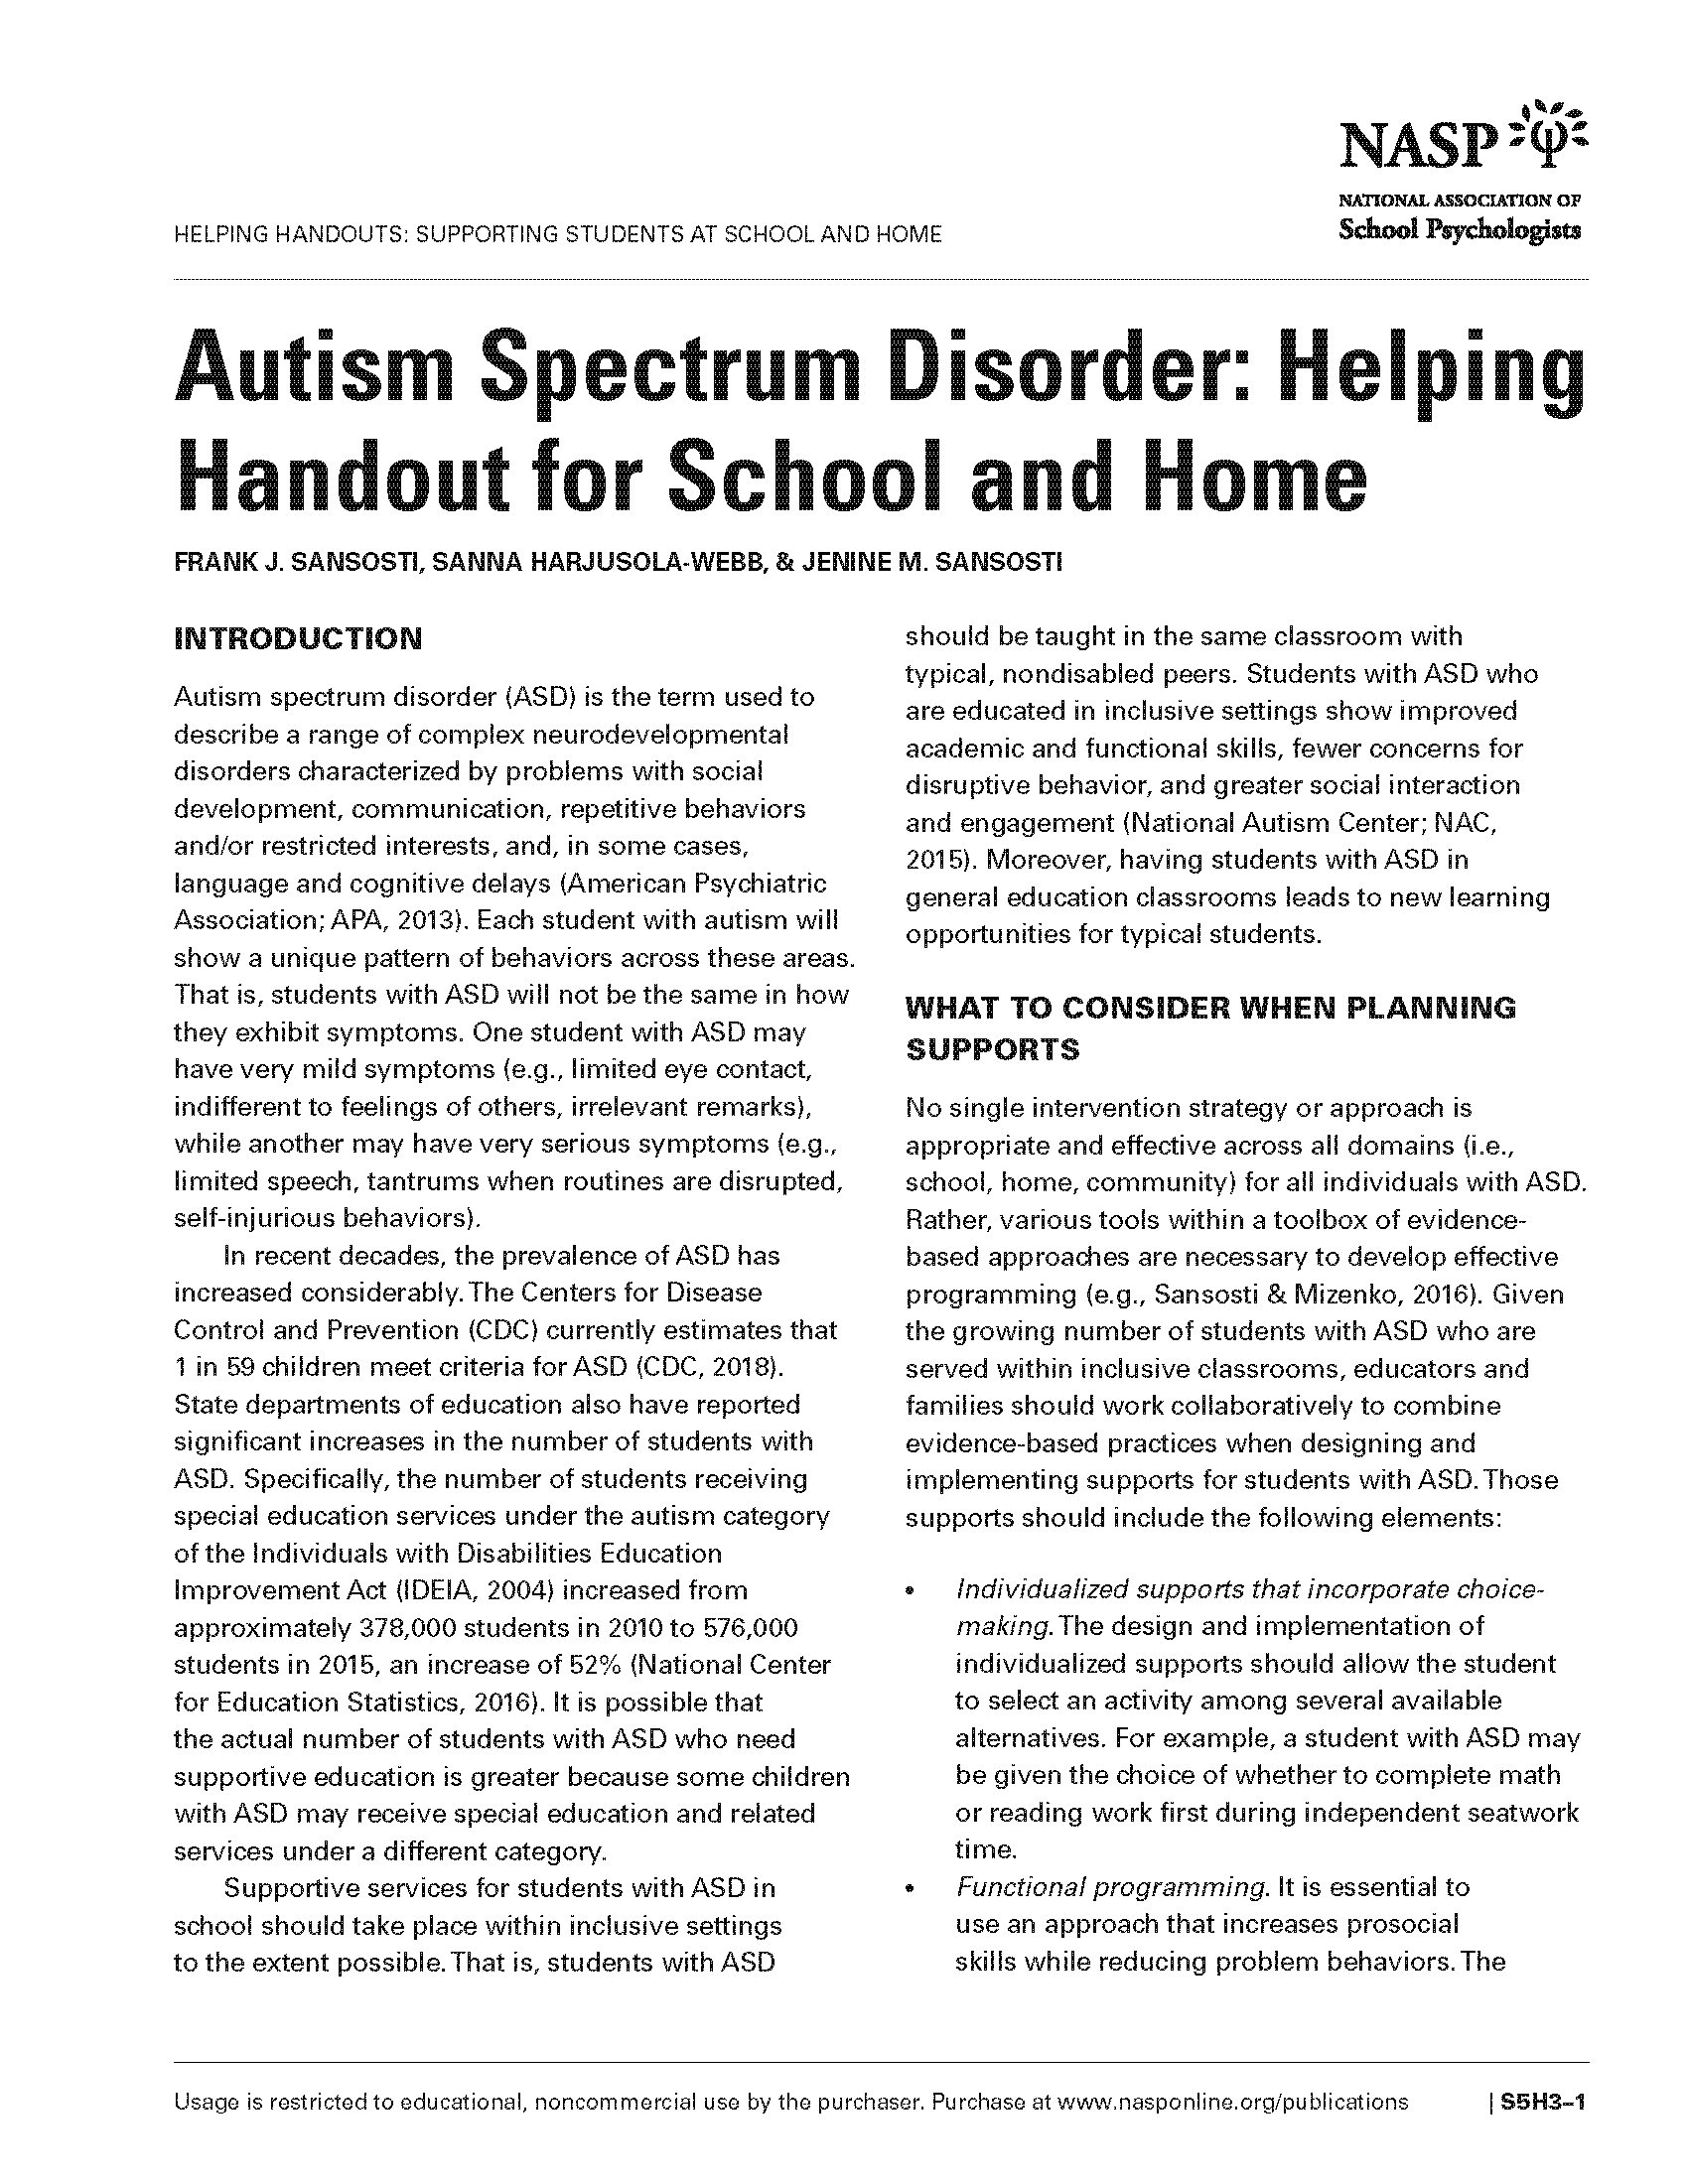 Autism Spectrum Disorder: Helping Handout for School and Home